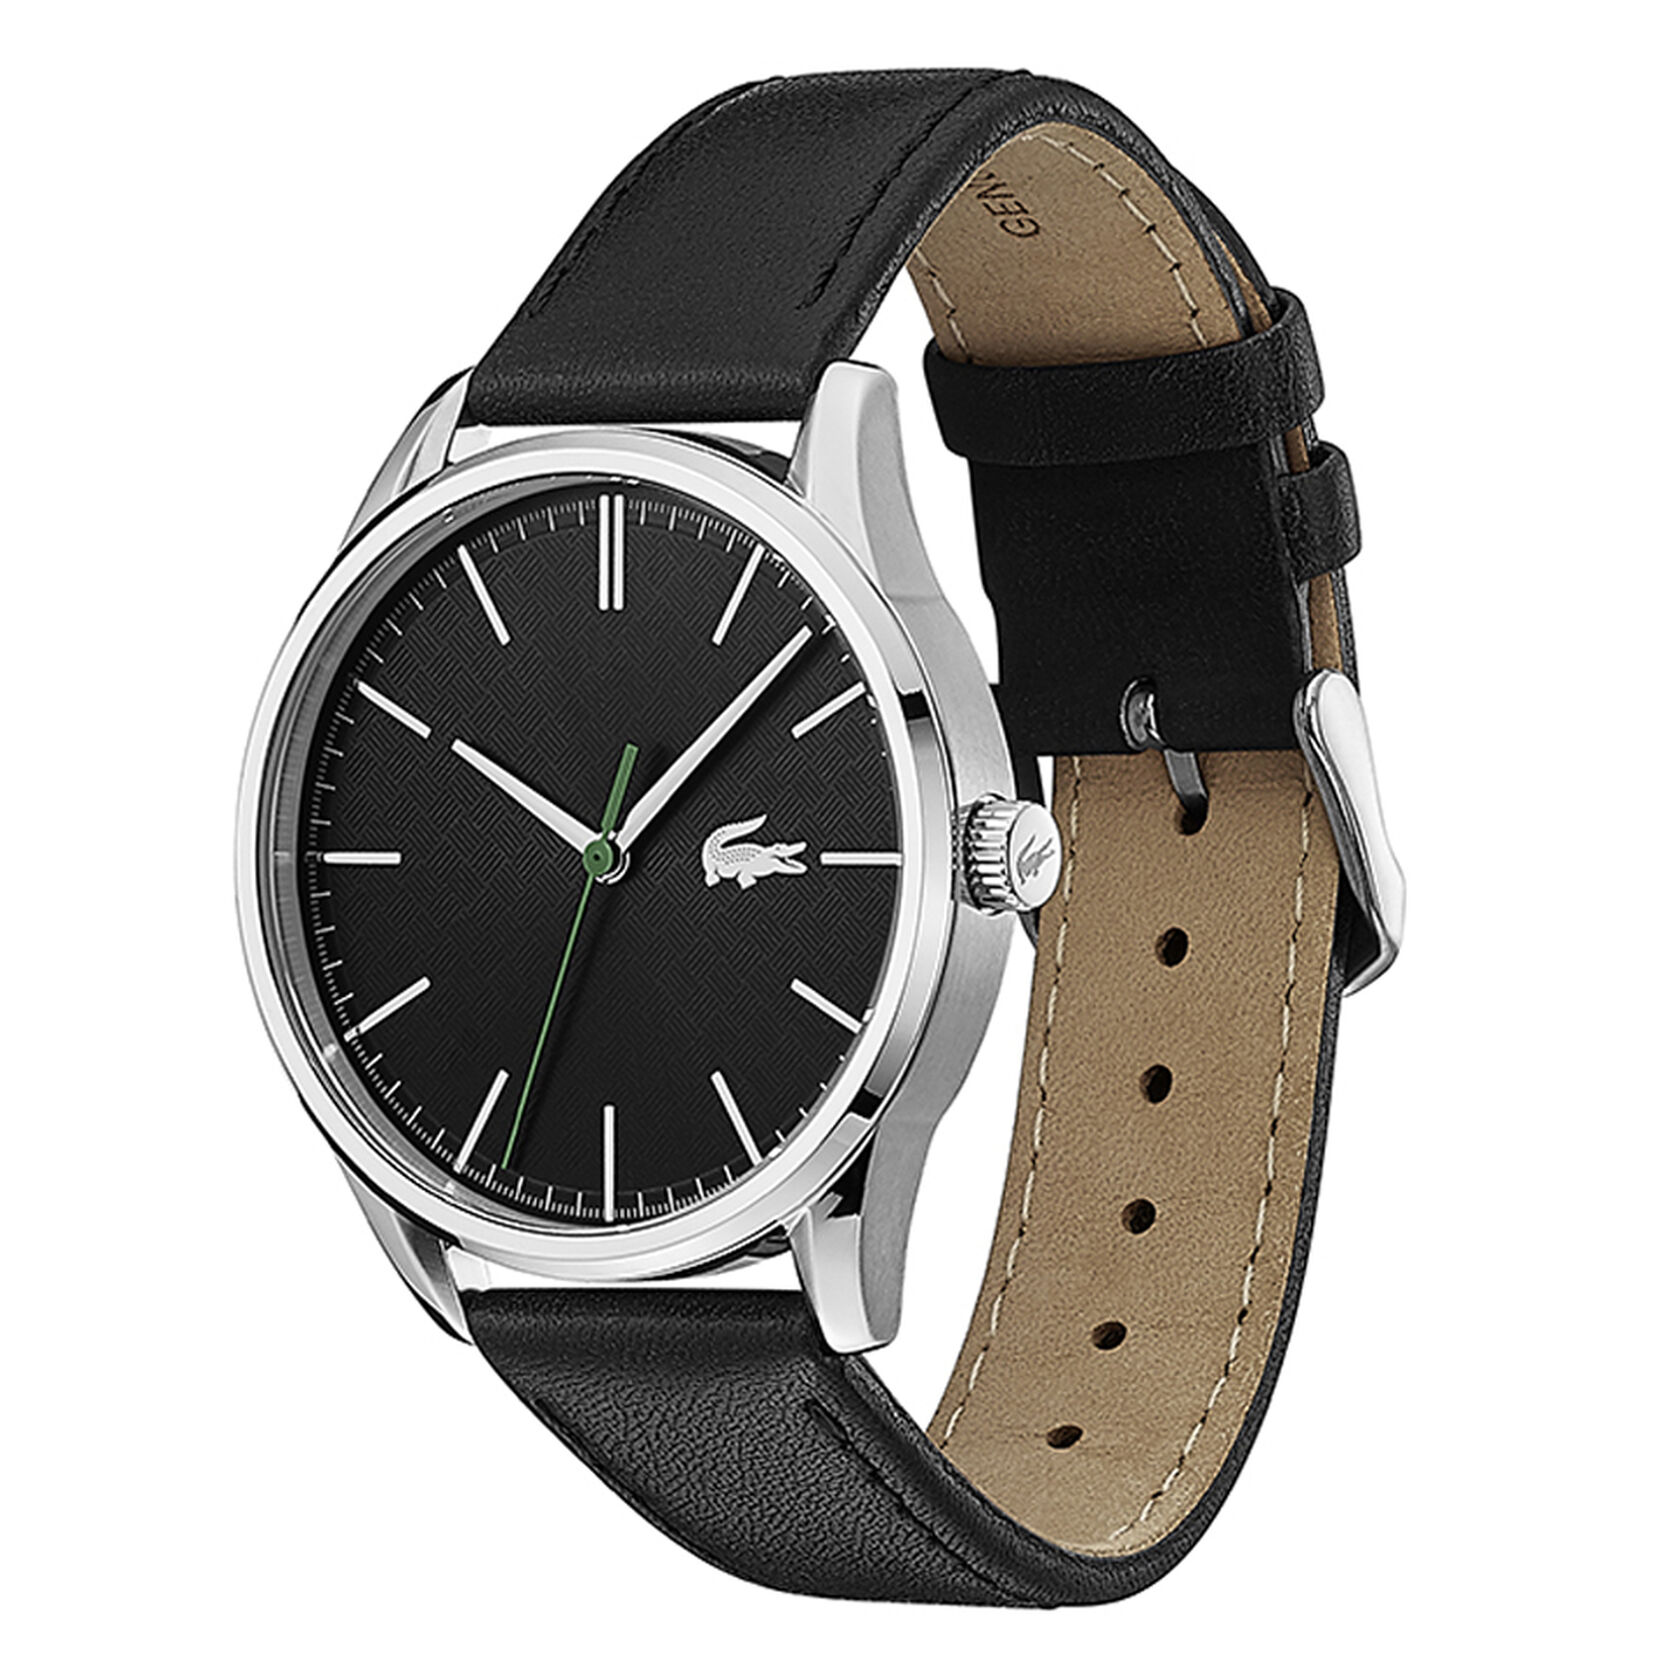 Lacoste | Movado Company Store | Lacoste Vienna Stainless Steel Watch with  Black Dial | Quarzuhren